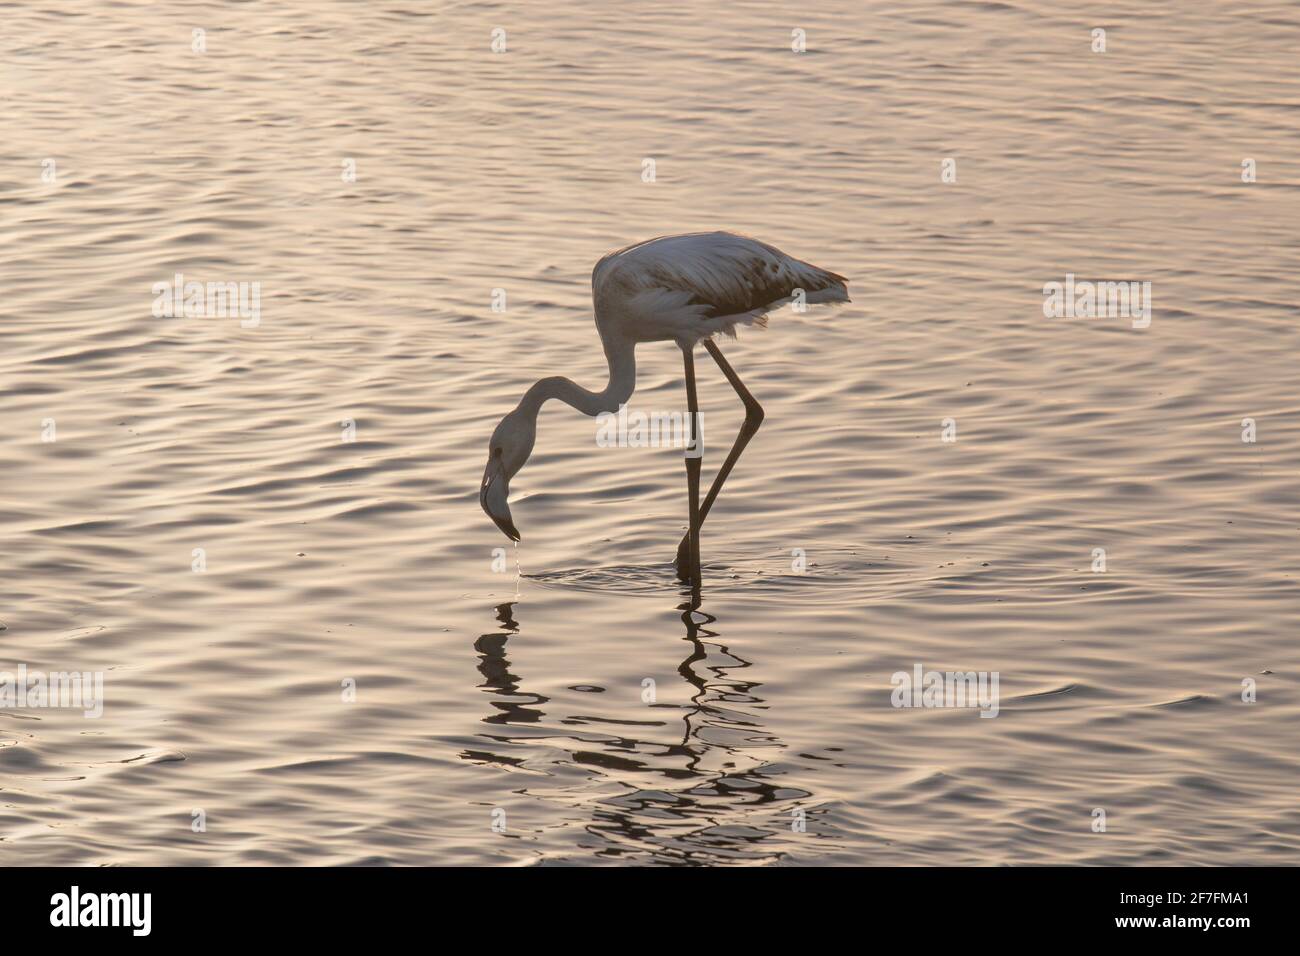 Flamingo in the water, Walvis Bay, Namibia, Africa Stock Photo